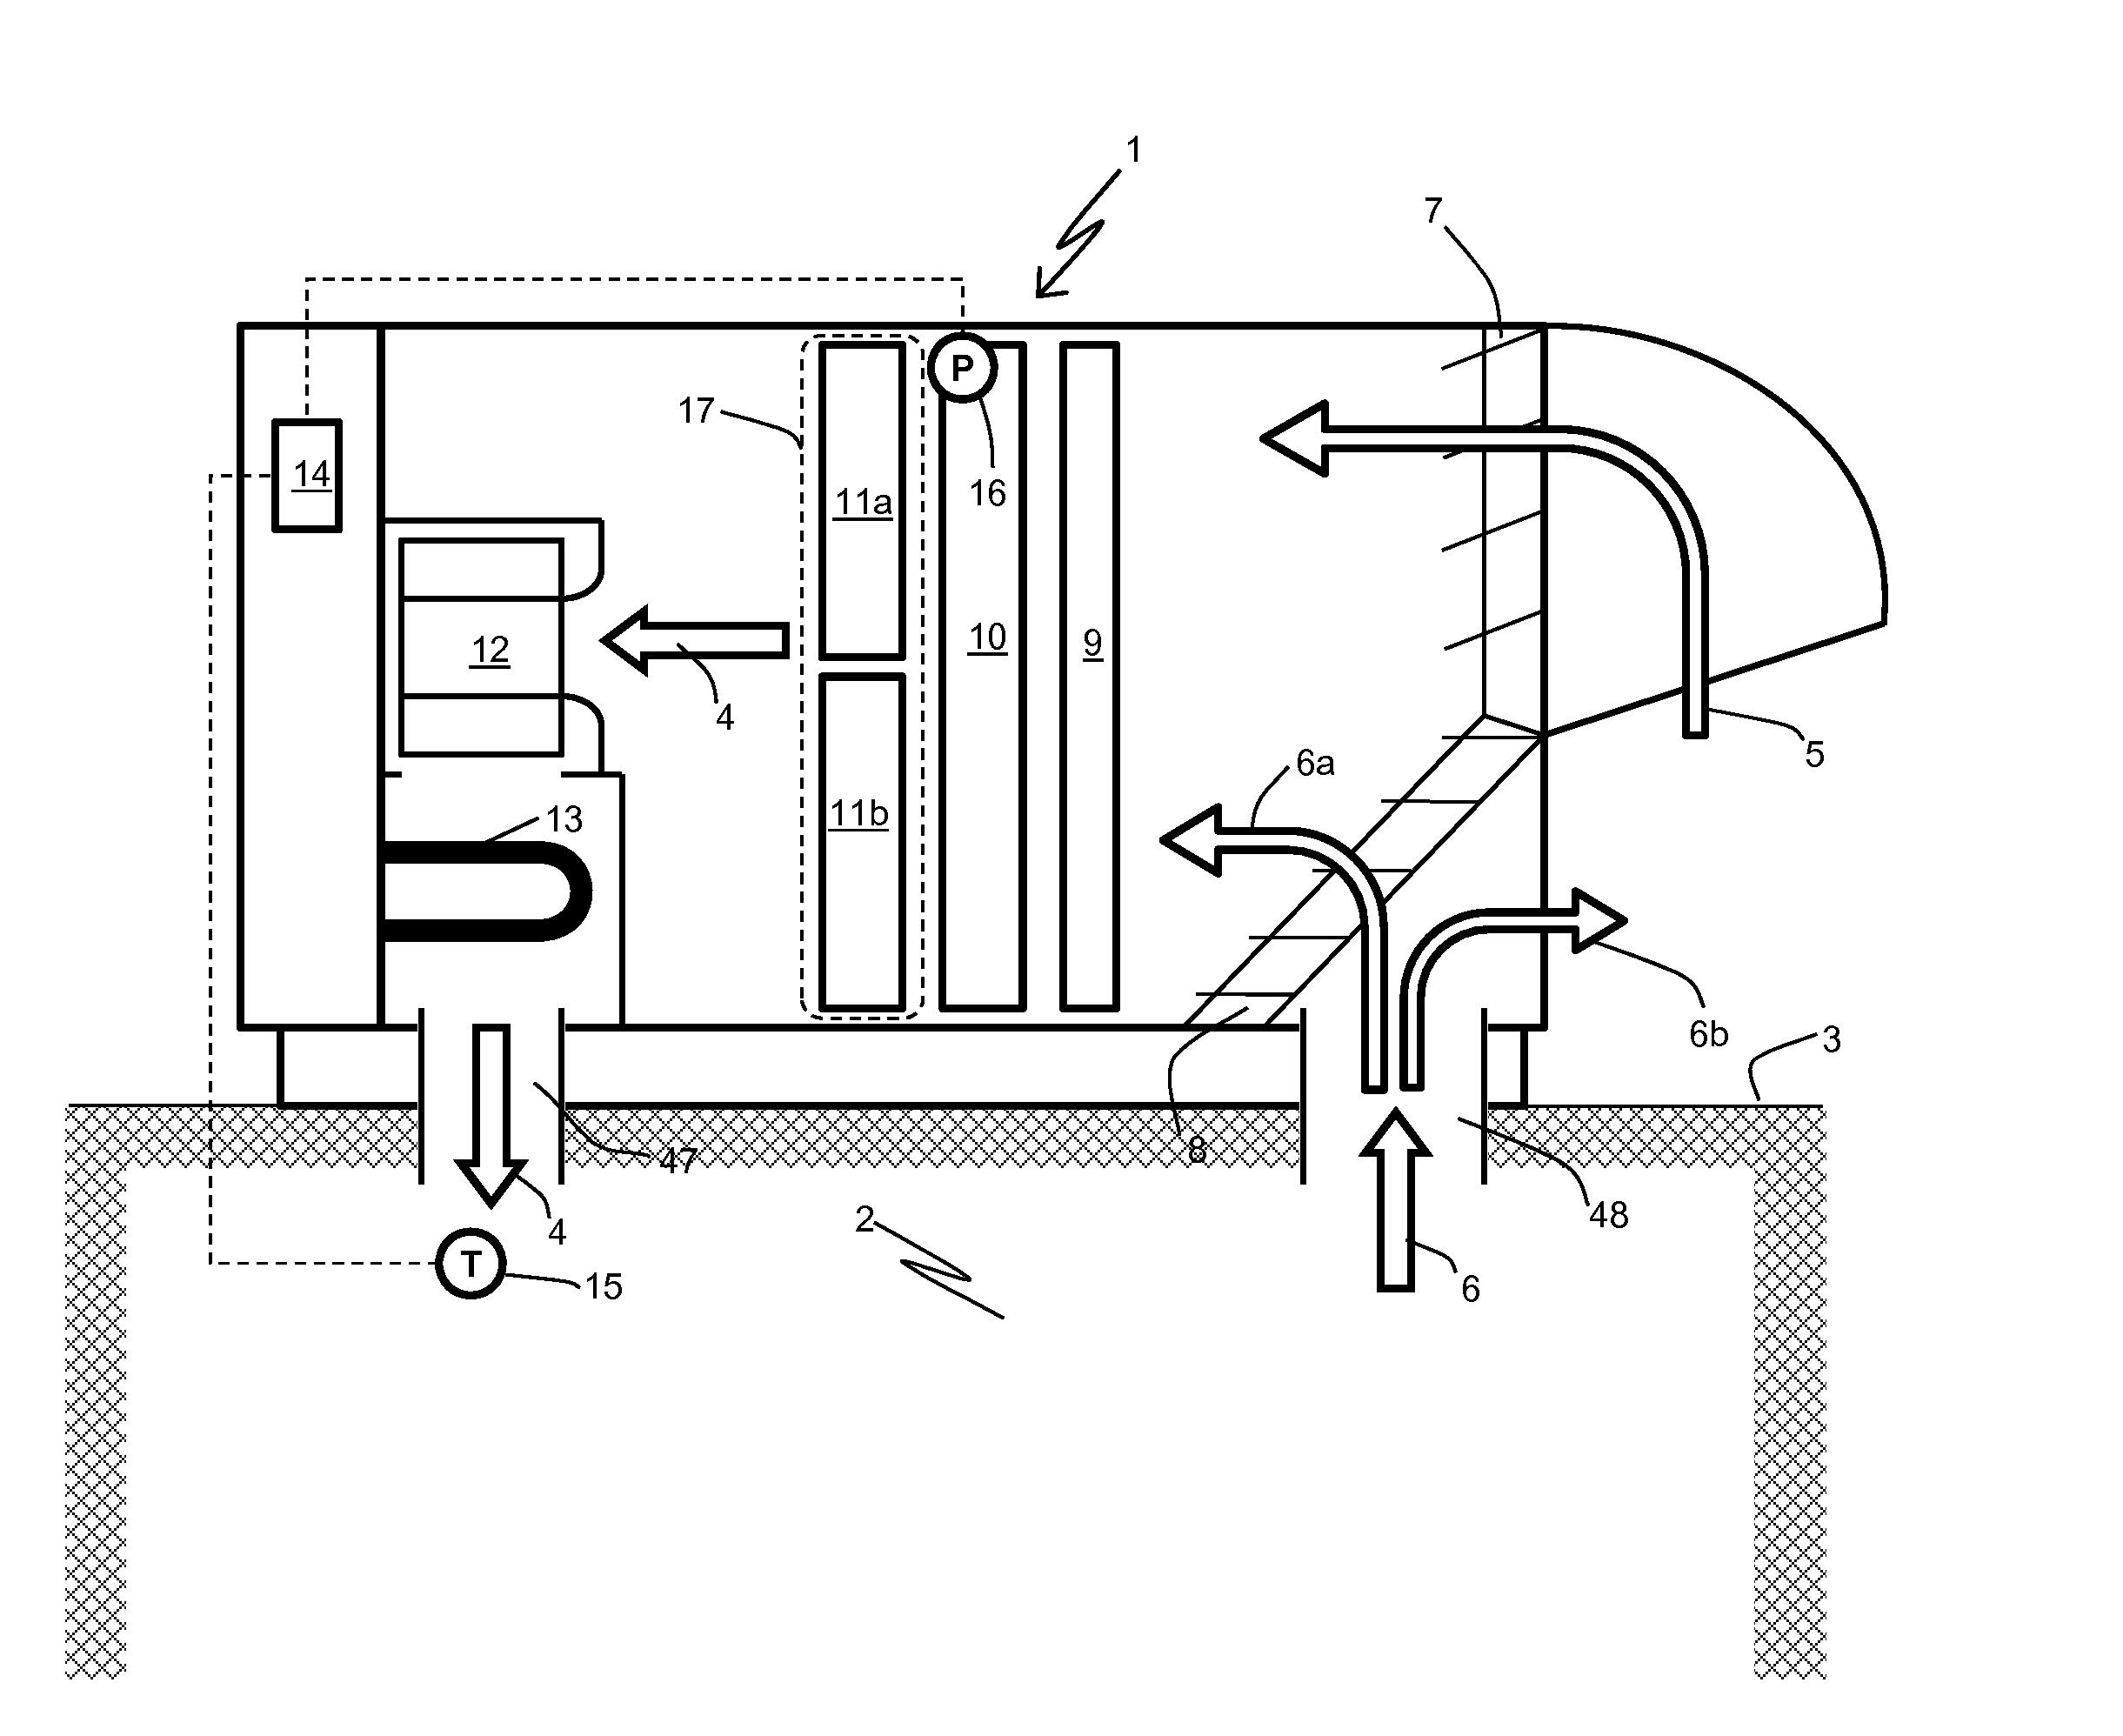 Space conditioning system with hot gas reheat, and method of operating the same